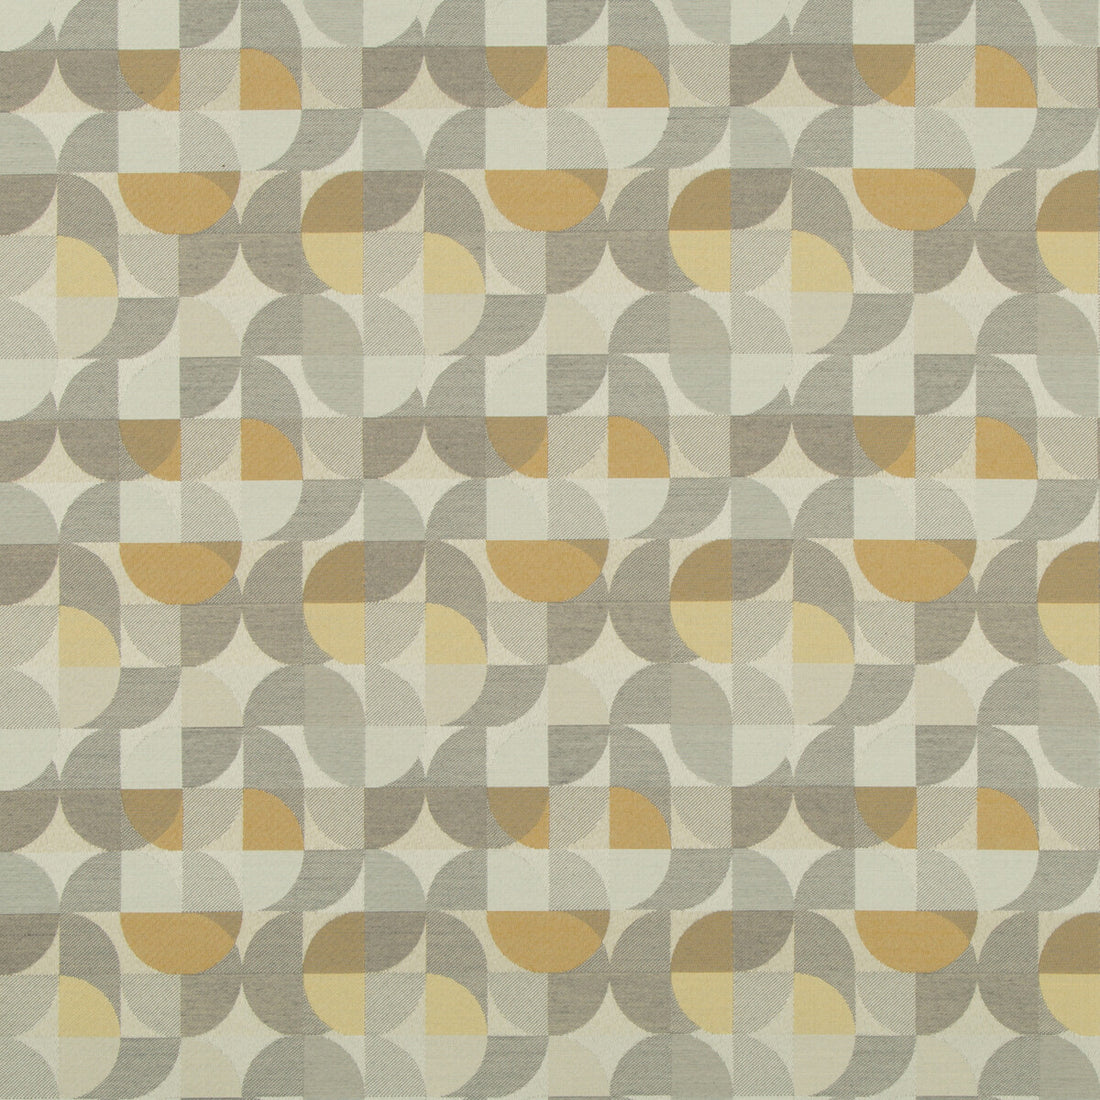 Mix Up fabric in butterscotch color - pattern 35090.11.0 - by Kravet Contract in the Gis Crypton collection